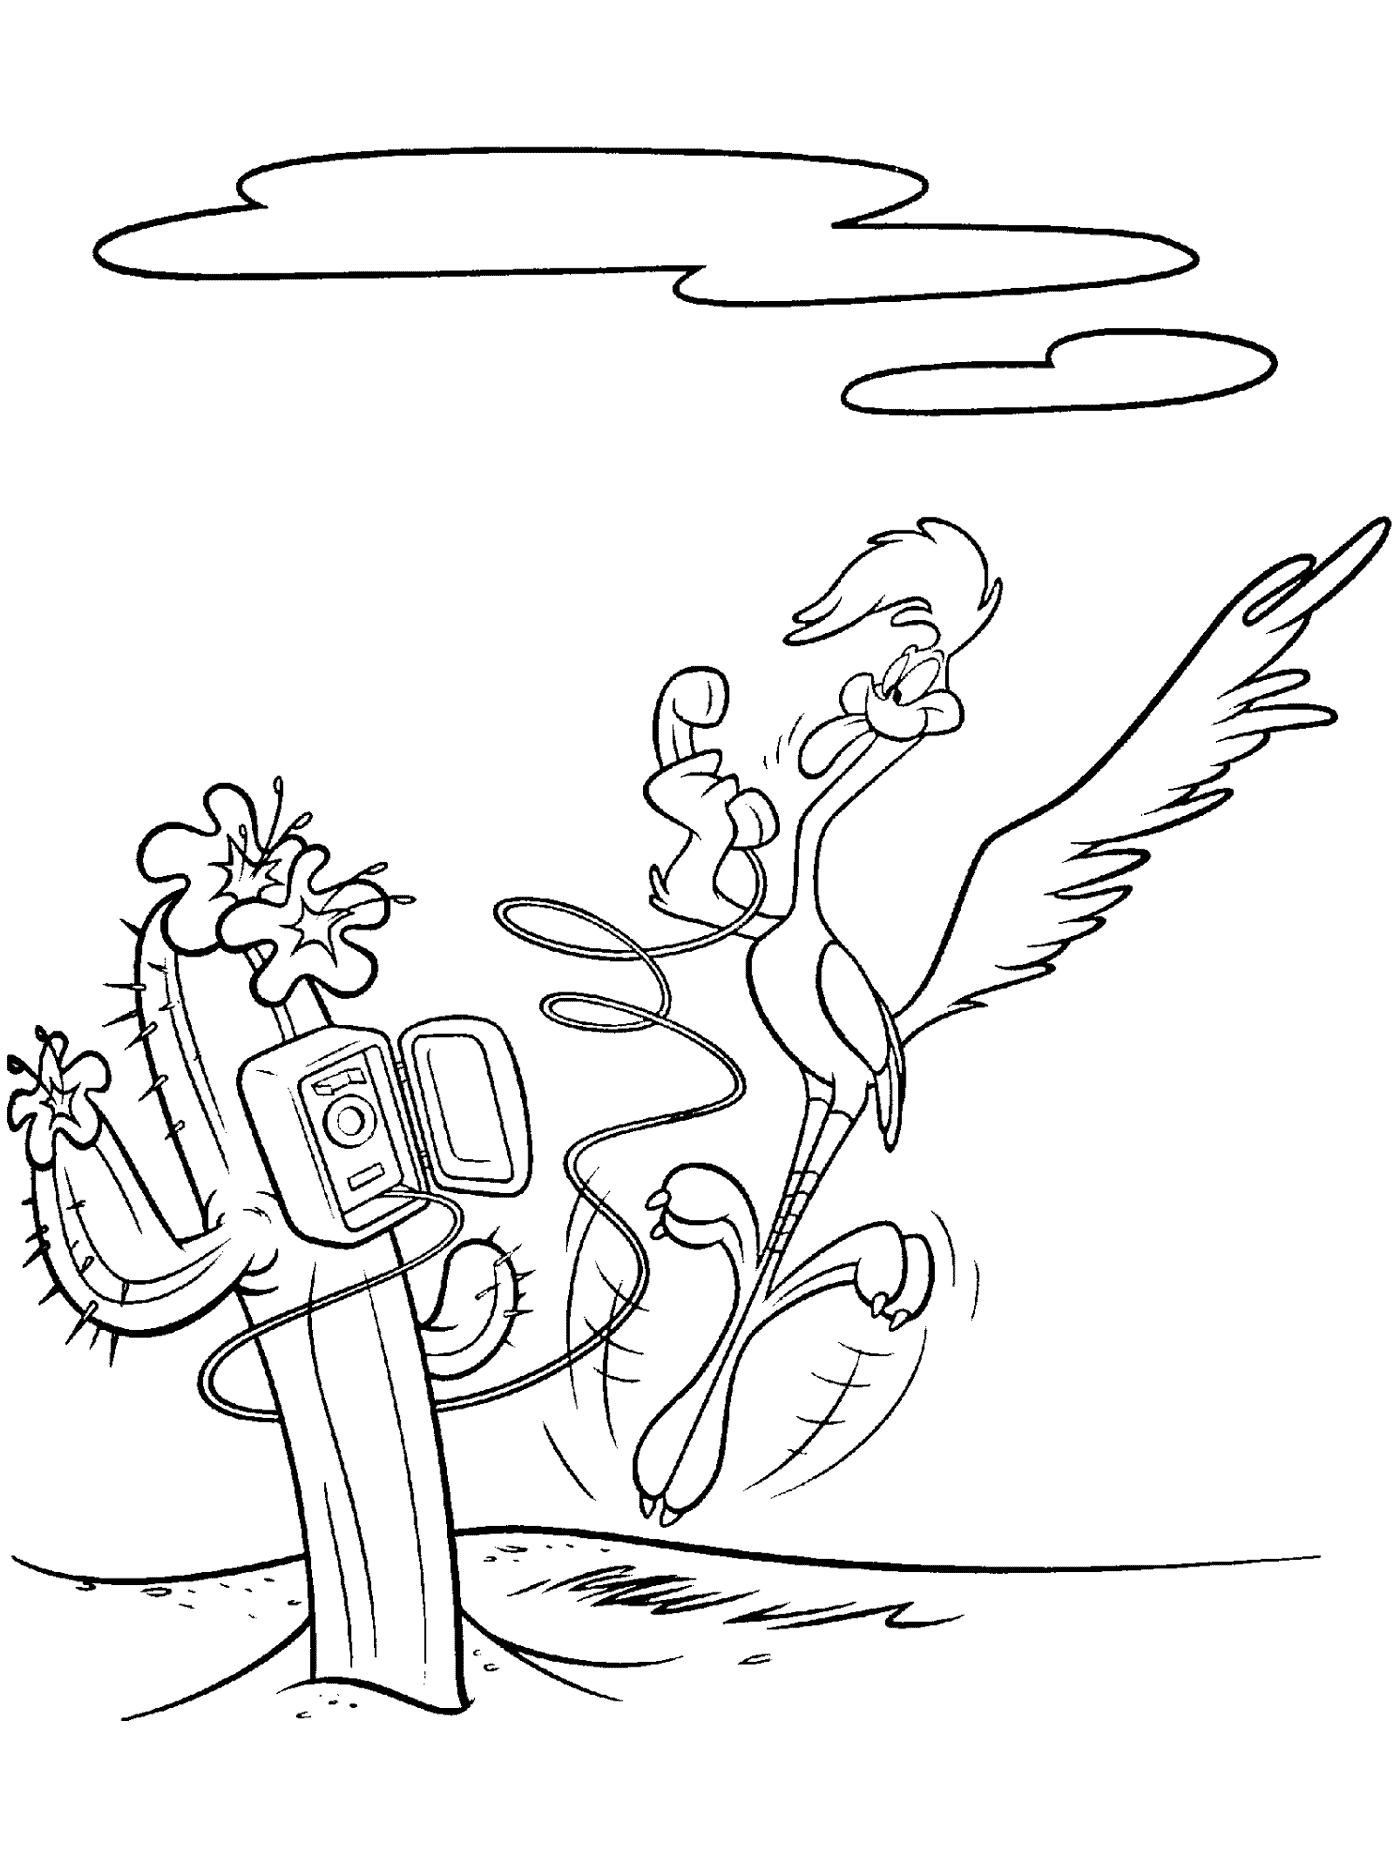 895 Cartoon Roadrunner Coloring Page with Printable